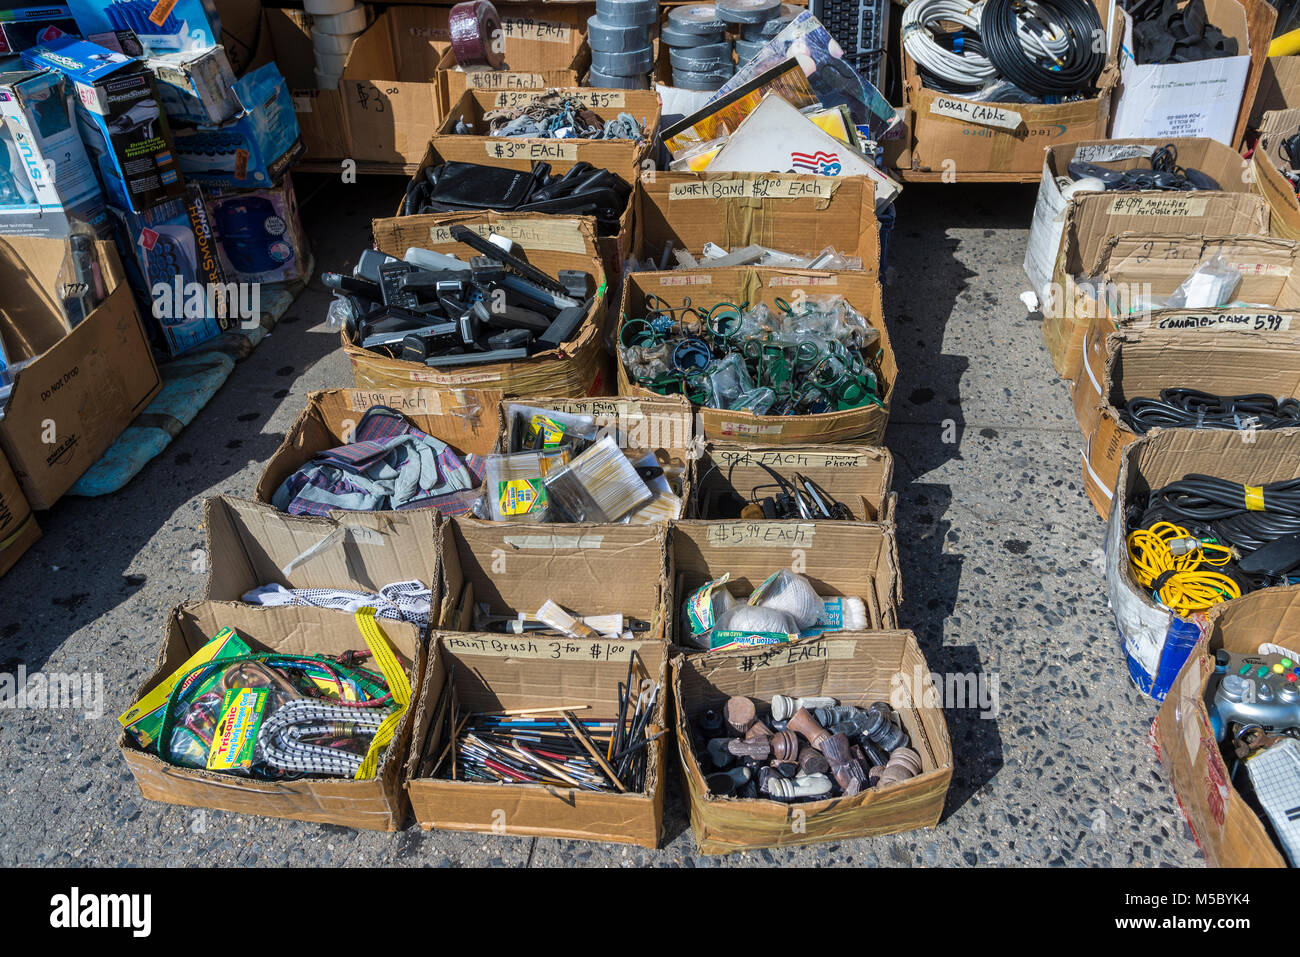 New York, NY 7 July 2014 - Miscellaneous items in cardboard boxes offered for sale on the sidewalk on Canal Street. ©Stacy Walsh Rosenstock/Alamy Stock Photo